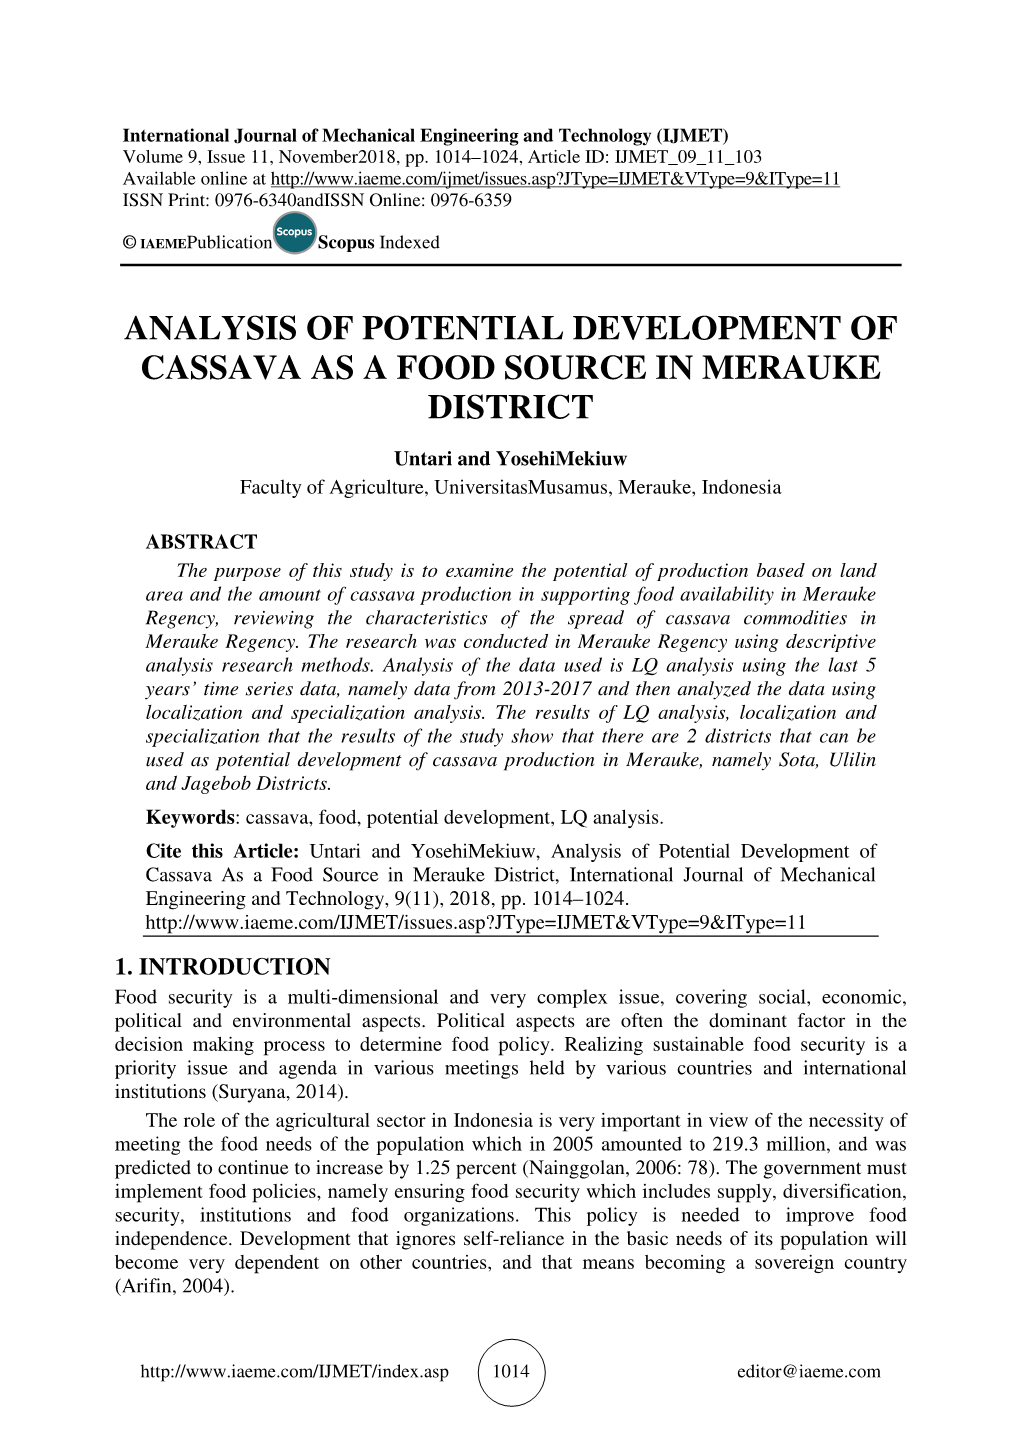 Analysis of Potential Development of Cassava As a Food Source in Merauke District